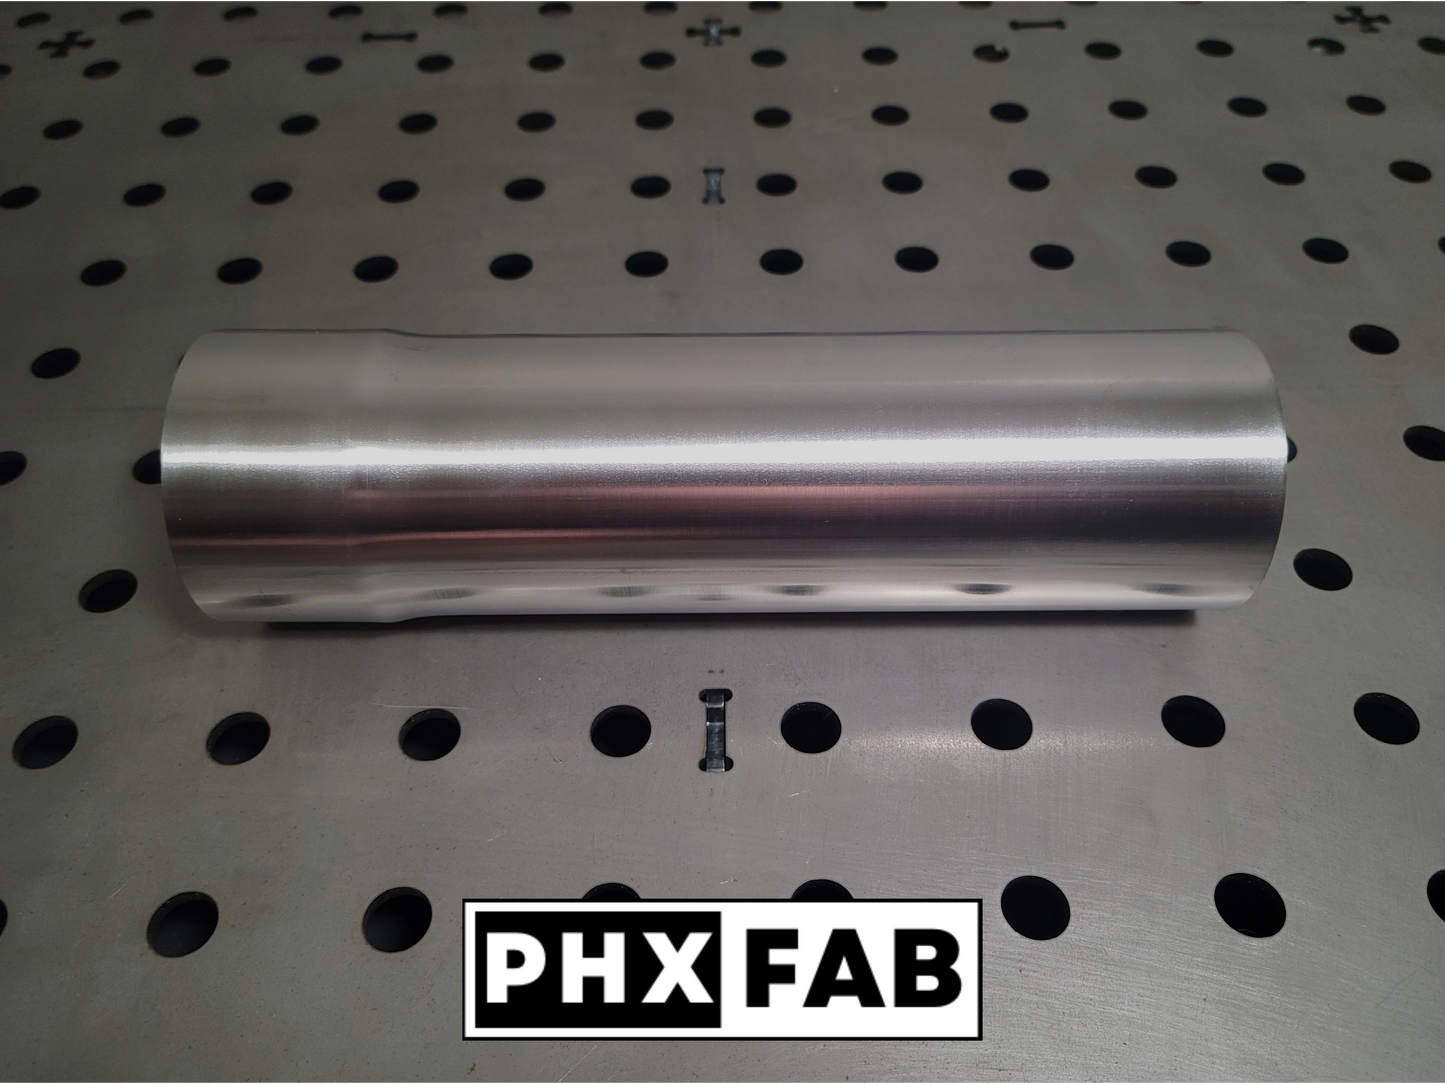 2 1/8" X 8" Stainless Steel Slip On Extension